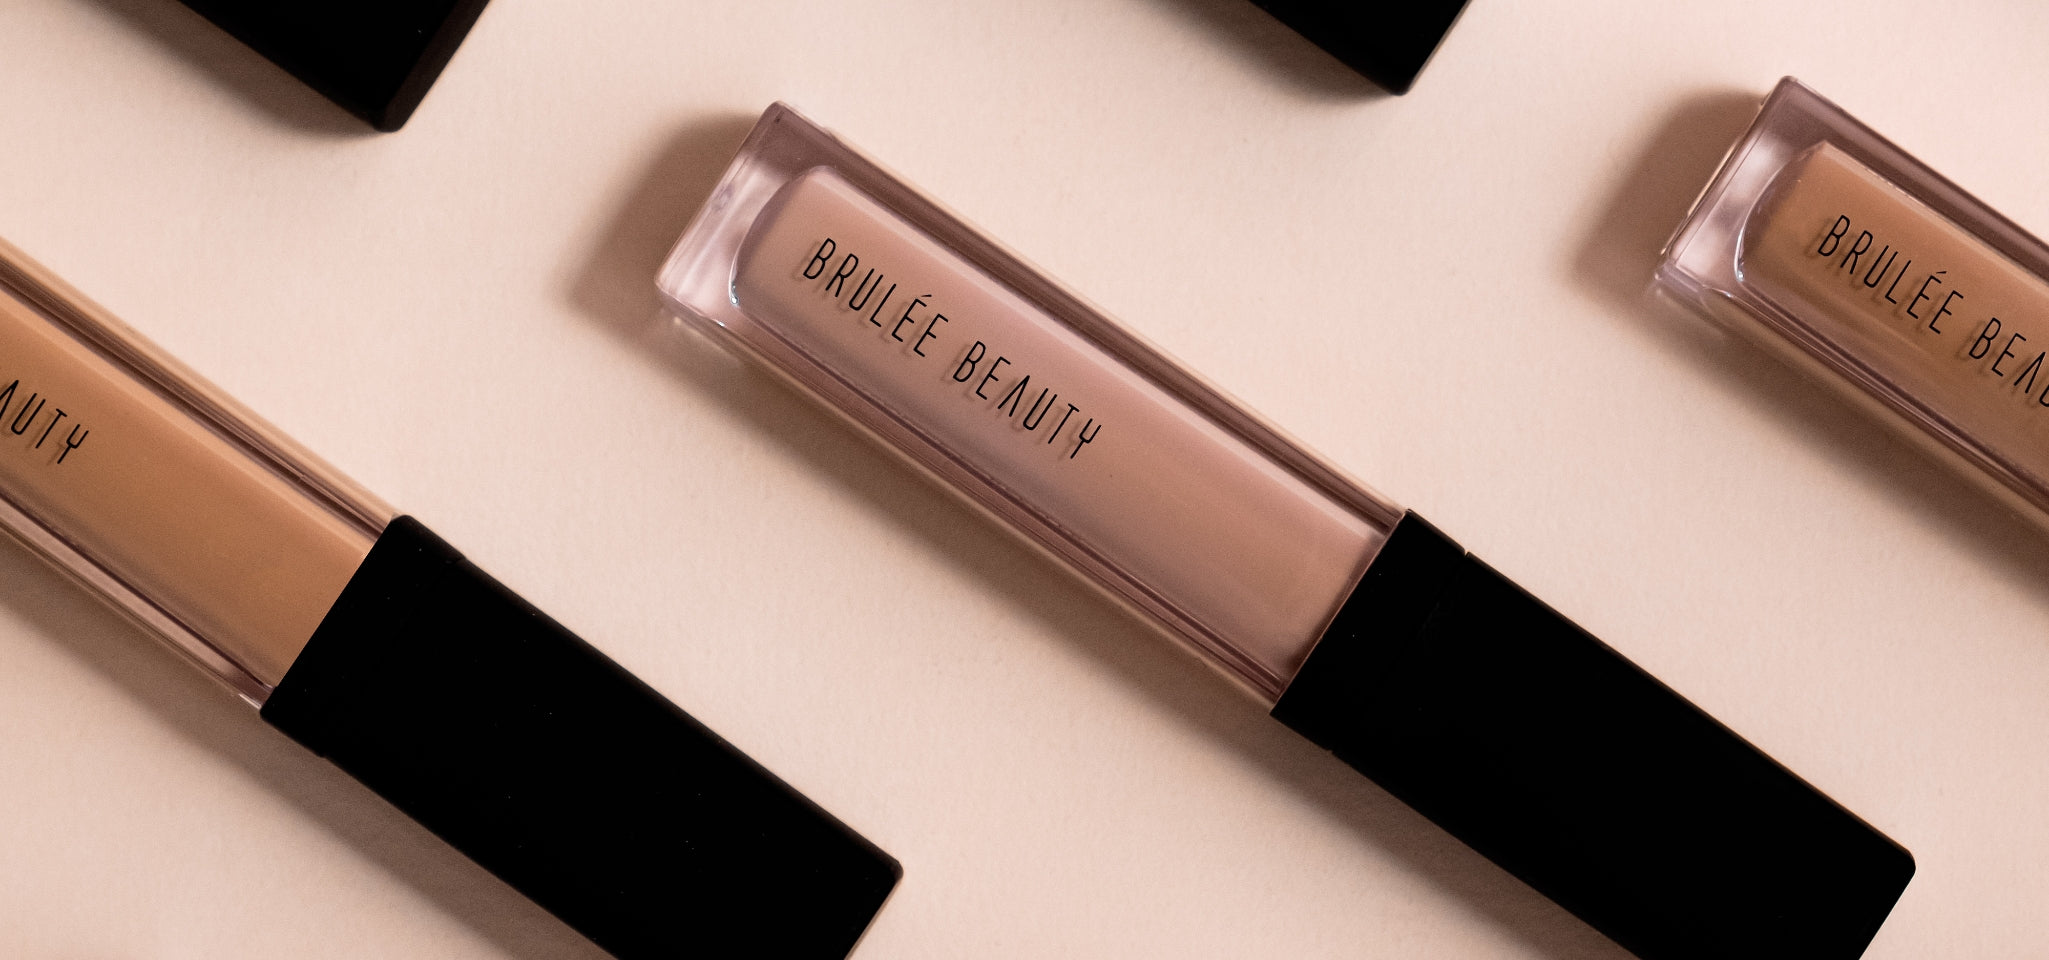 Brulée Beauty colour correcting concealer for golden and yellow skin tones